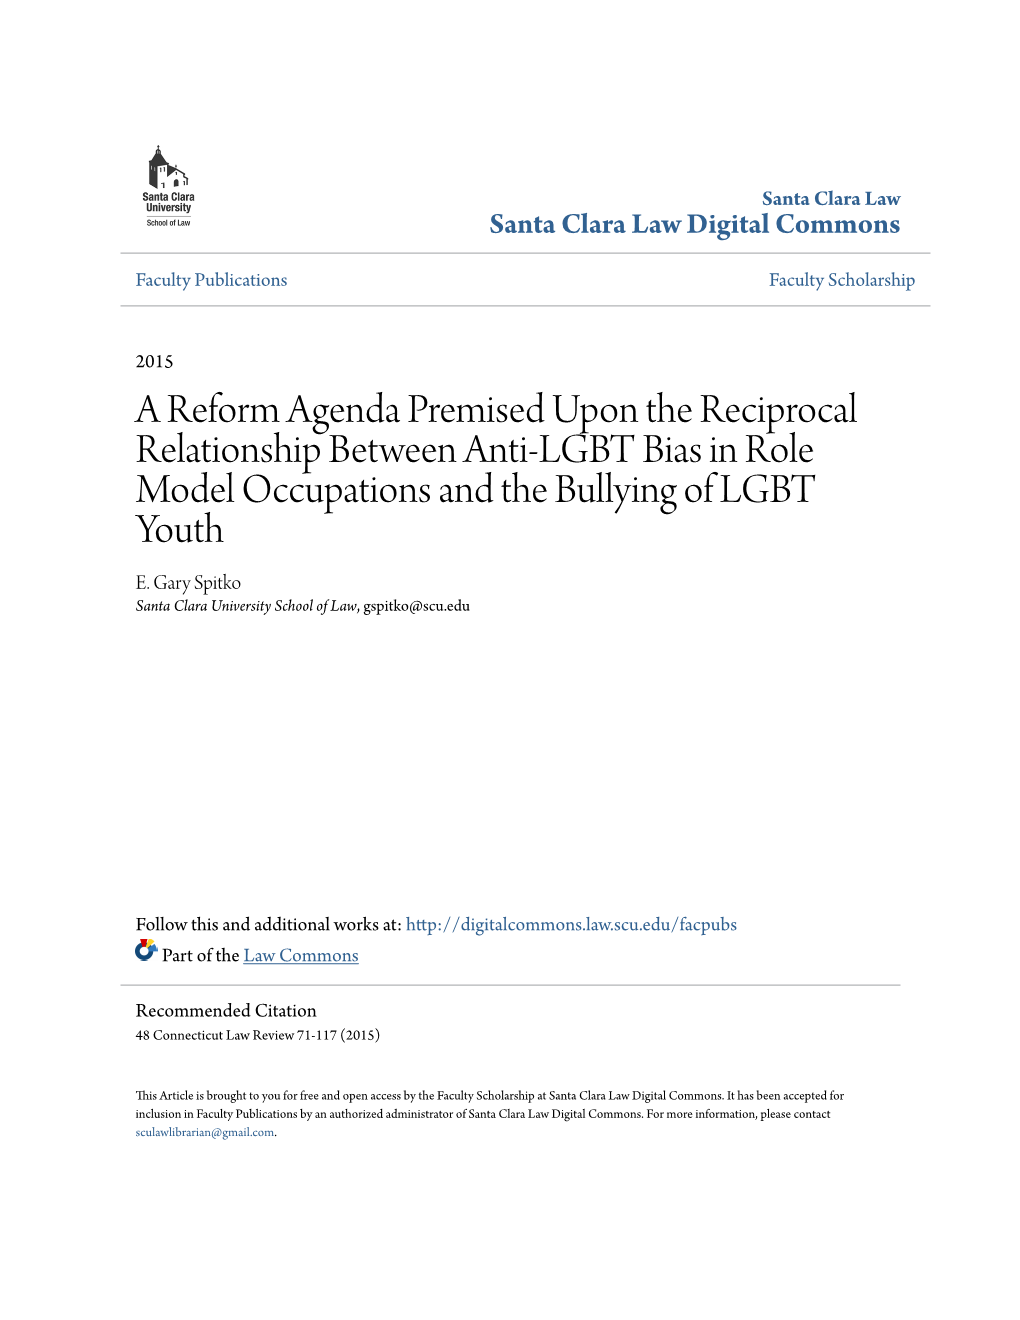 A Reform Agenda Premised Upon the Reciprocal Relationship Between Anti-LGBT Bias in Role Model Occupations and the Bullying of LGBT Youth E